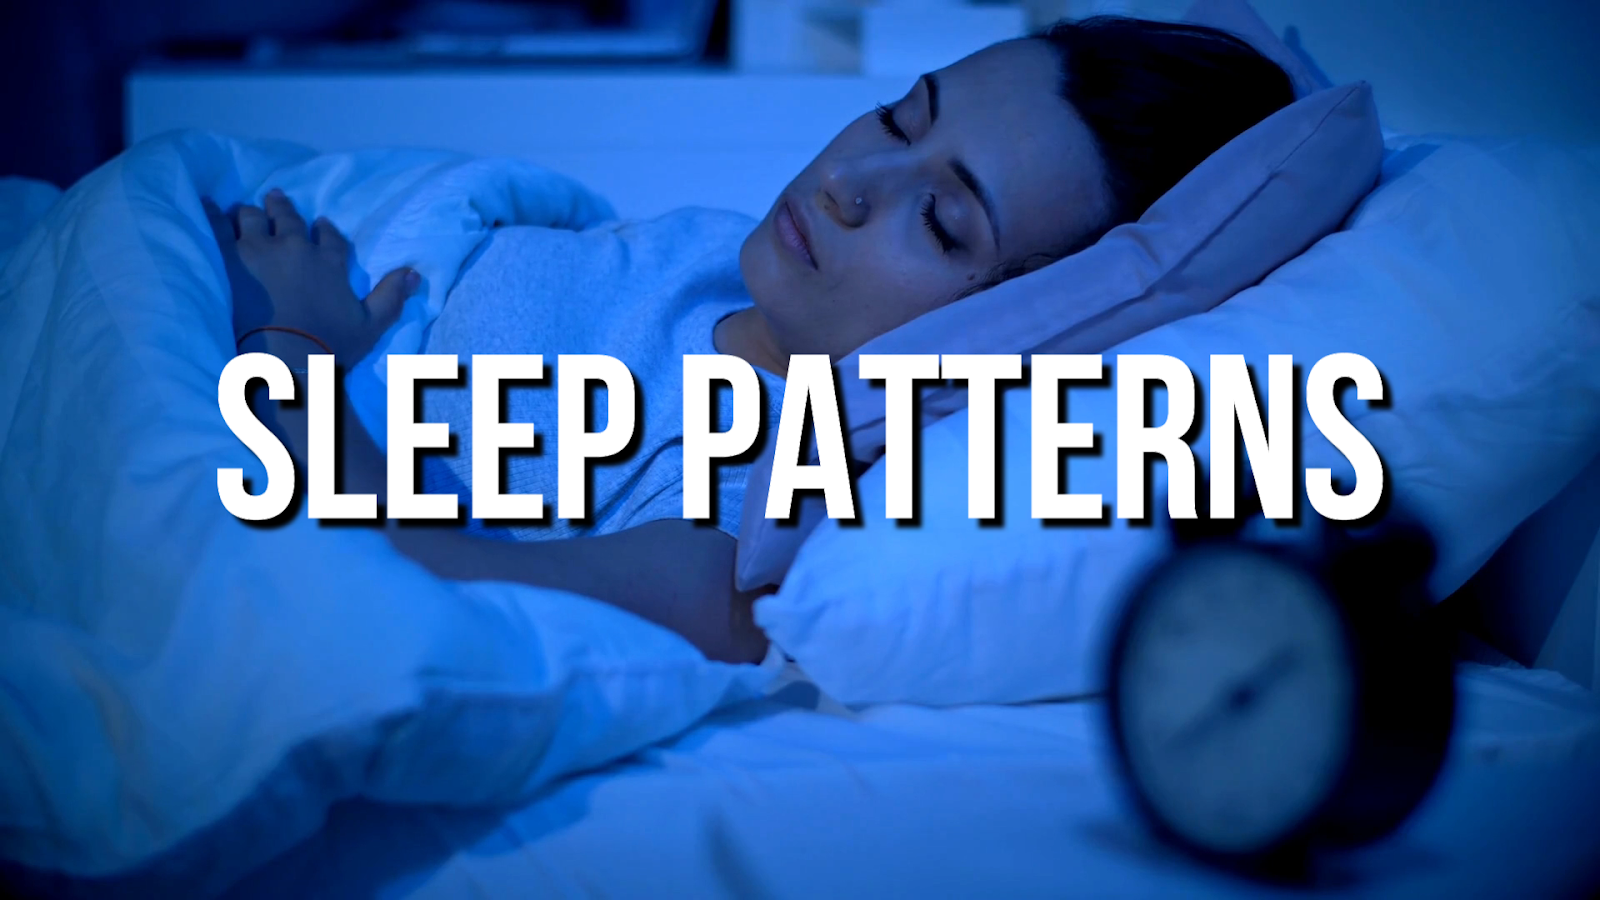 Sleep patterns are an often forgotten but important part of strength training and weight loss